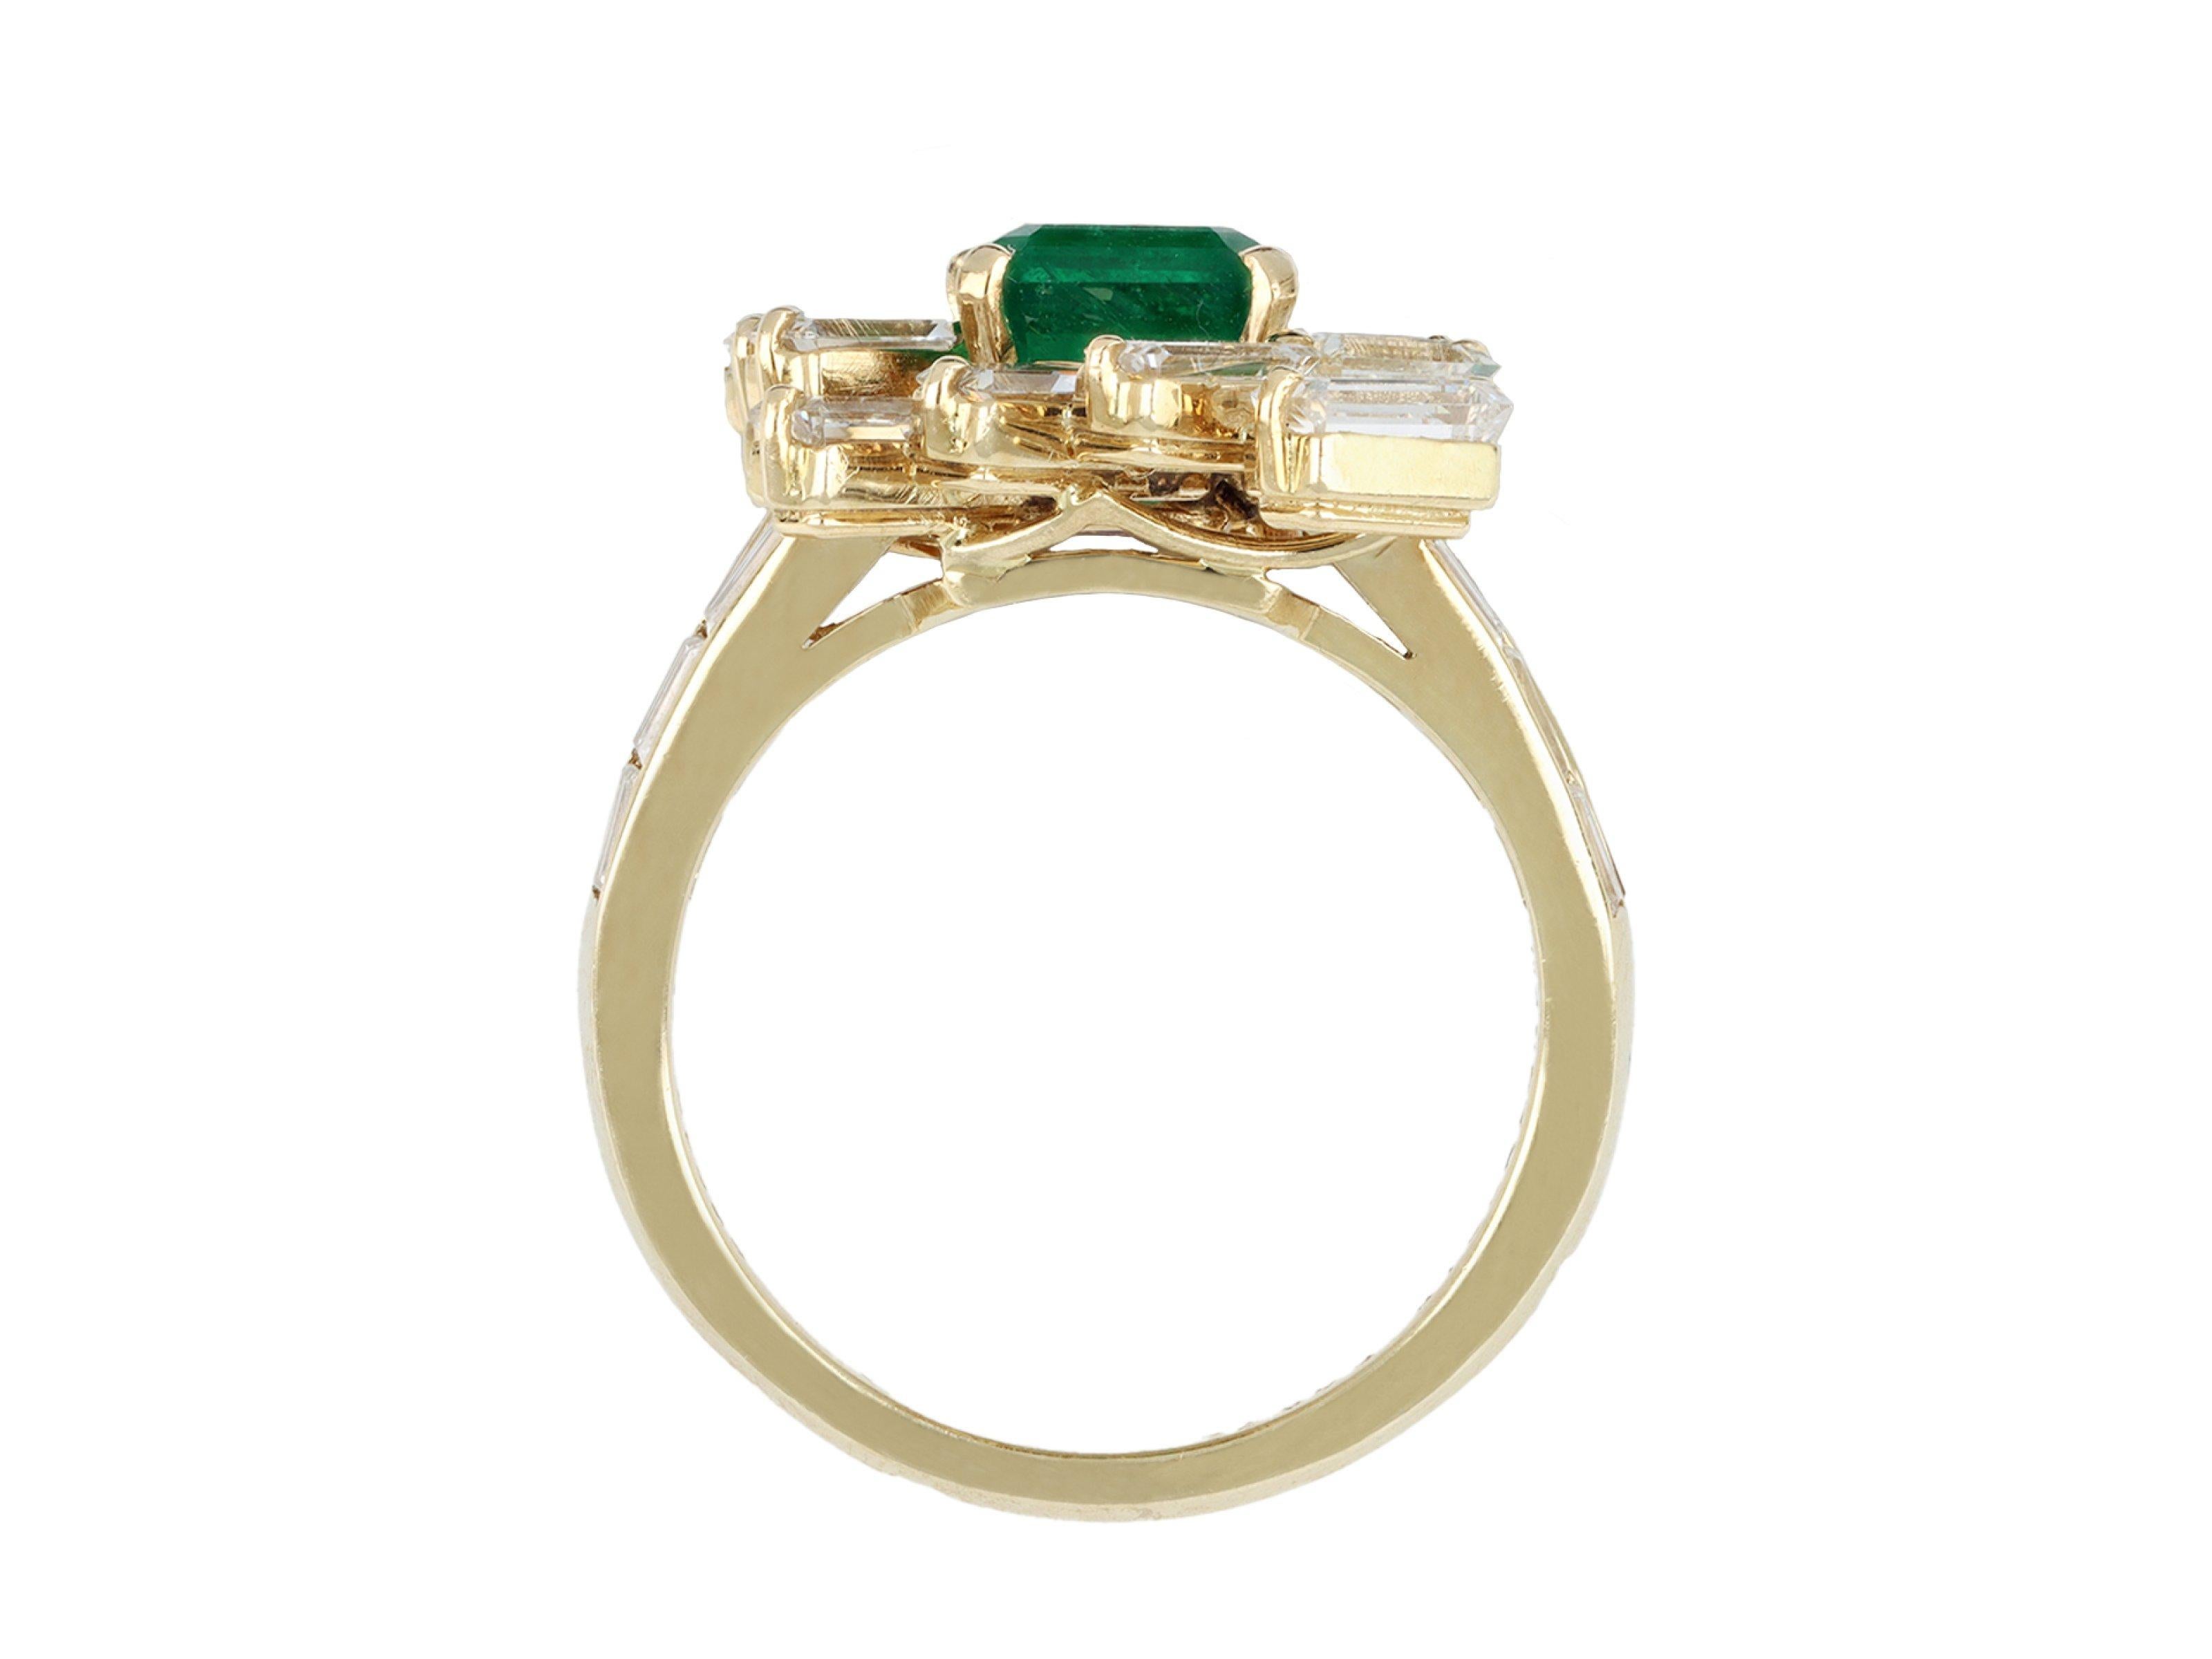 Mauboussin emerald and diamond cluster ring. Set with one octagonal emerald-cut natural Zambian emerald in an open back claw setting with an approximate weight of 2.40 carats, surrounded fourteen rectangular and tapered baguette cut diamonds in open